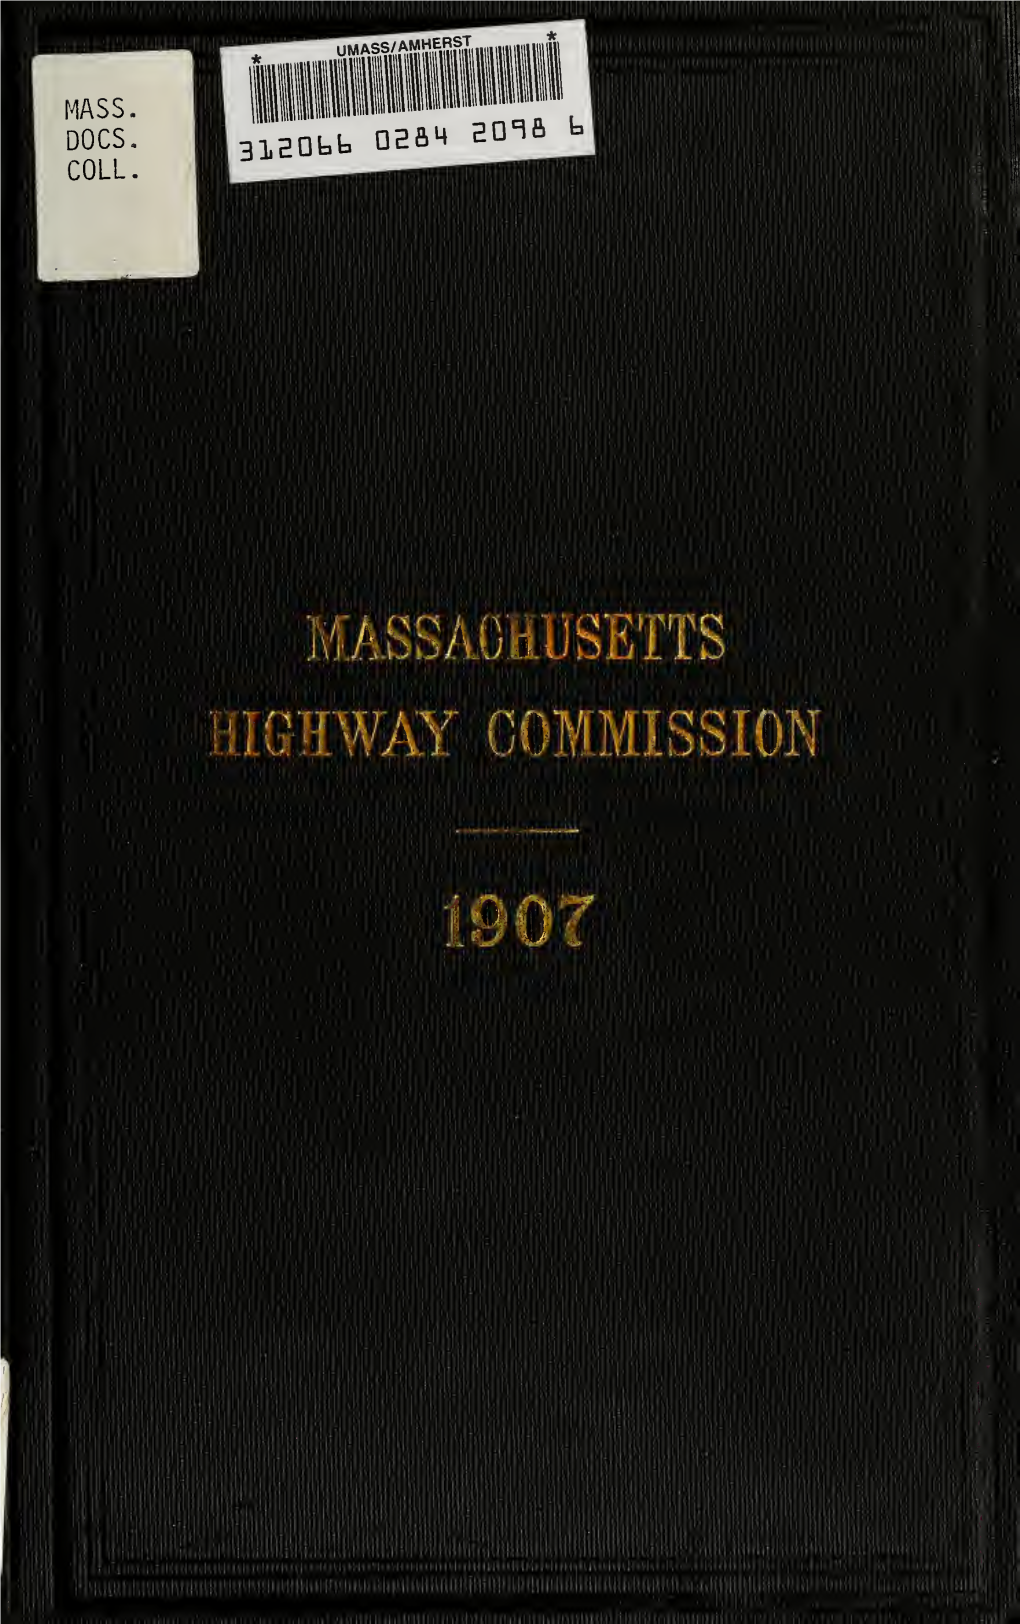 Annual Report of the Massachusetts Highway Commission Concerning Com- Panies Engaged in the Transmission of Intelligence by Electricity